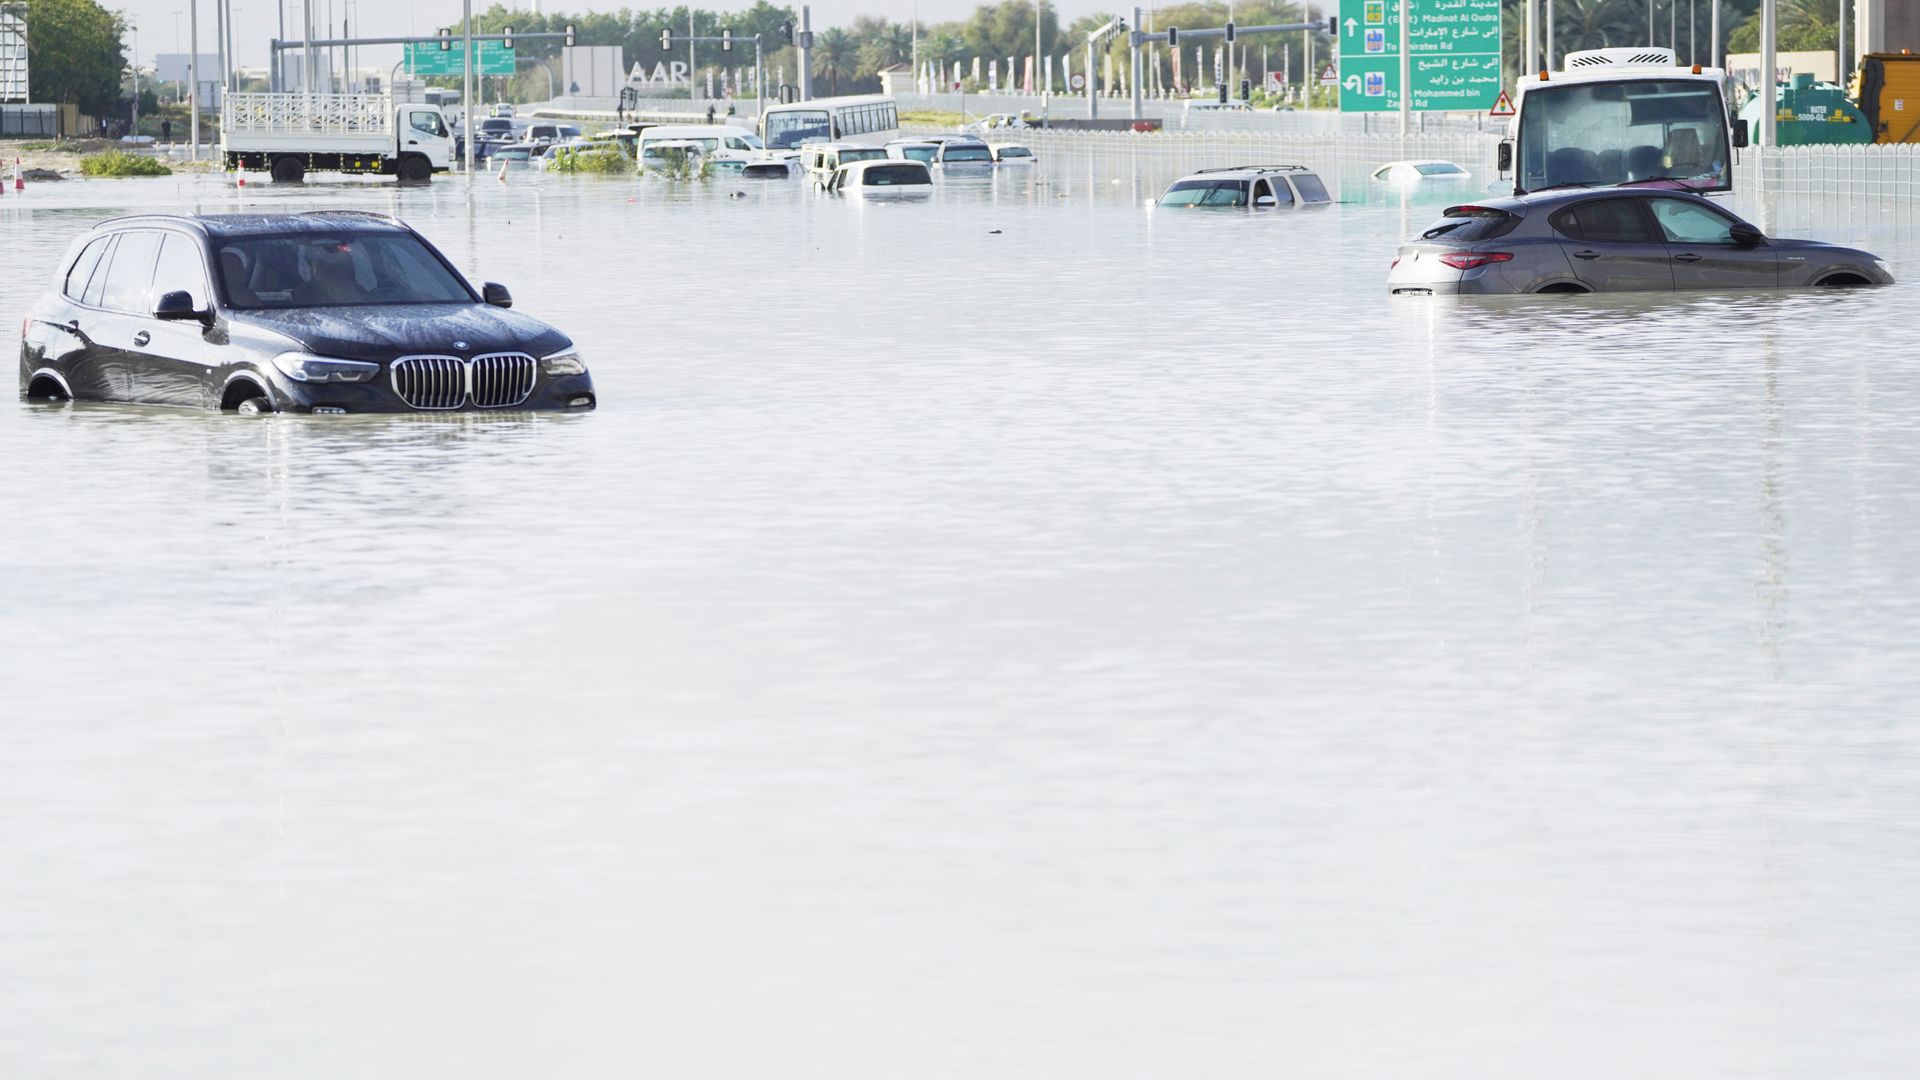 'Carnage' at Dubai airport as UAE hit by 'heaviest rainfall in 75 years'